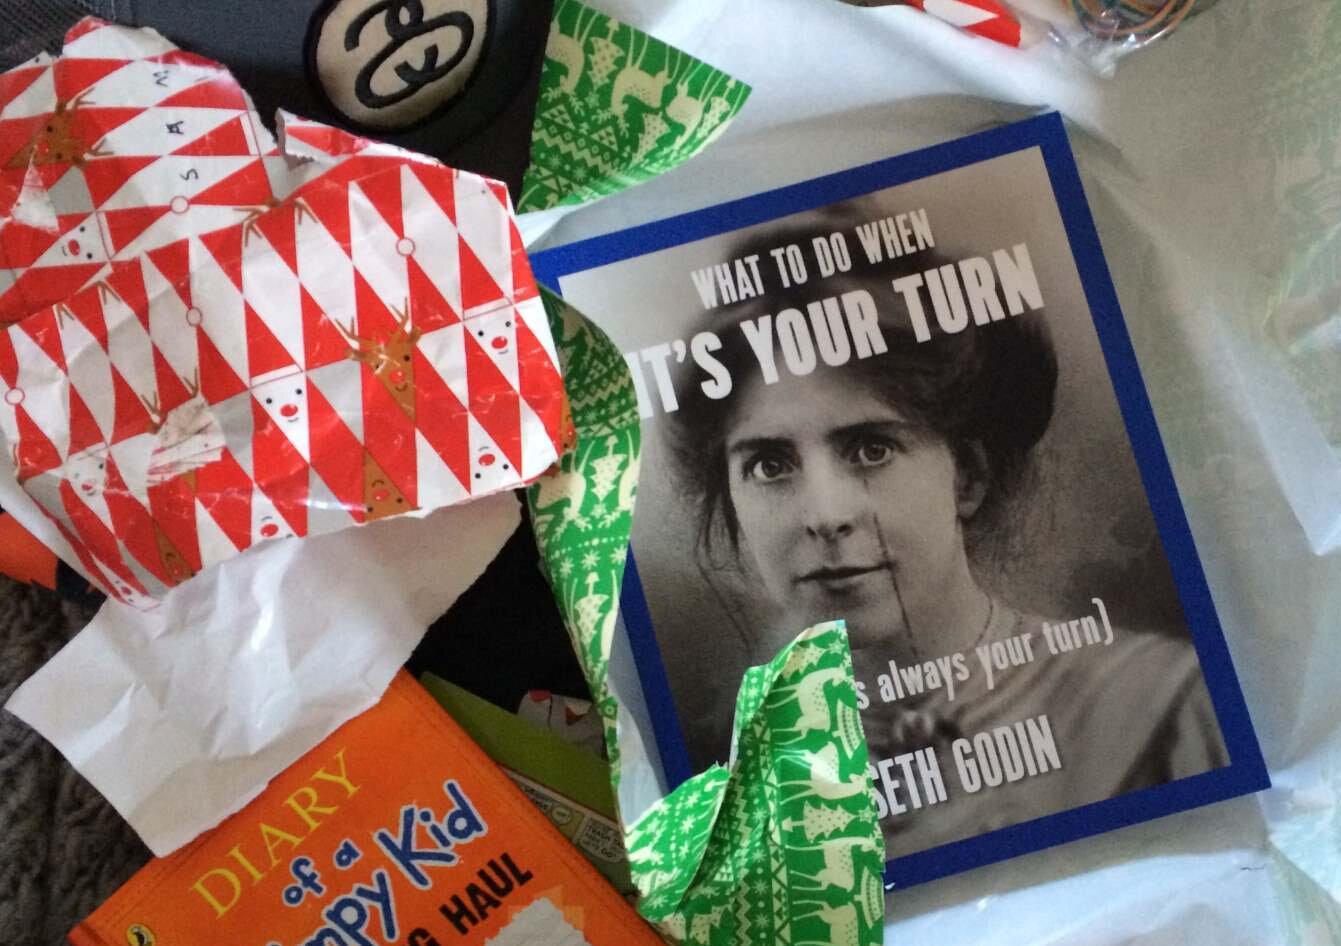 Seth Godin Its your turn book and STEAM Co Xmas.jpg